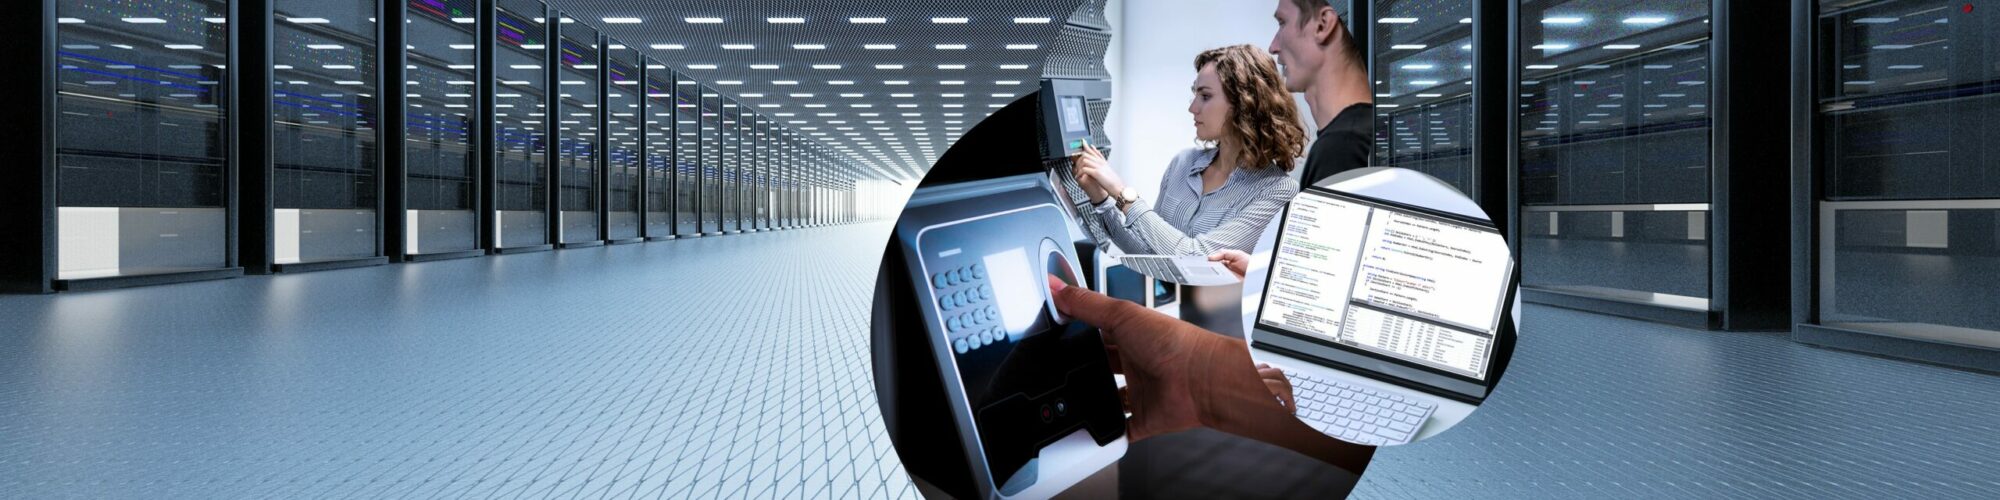 IT security and data protection are addressed in the image by a data center, two women in front of a digital access barrier, and a laptop.